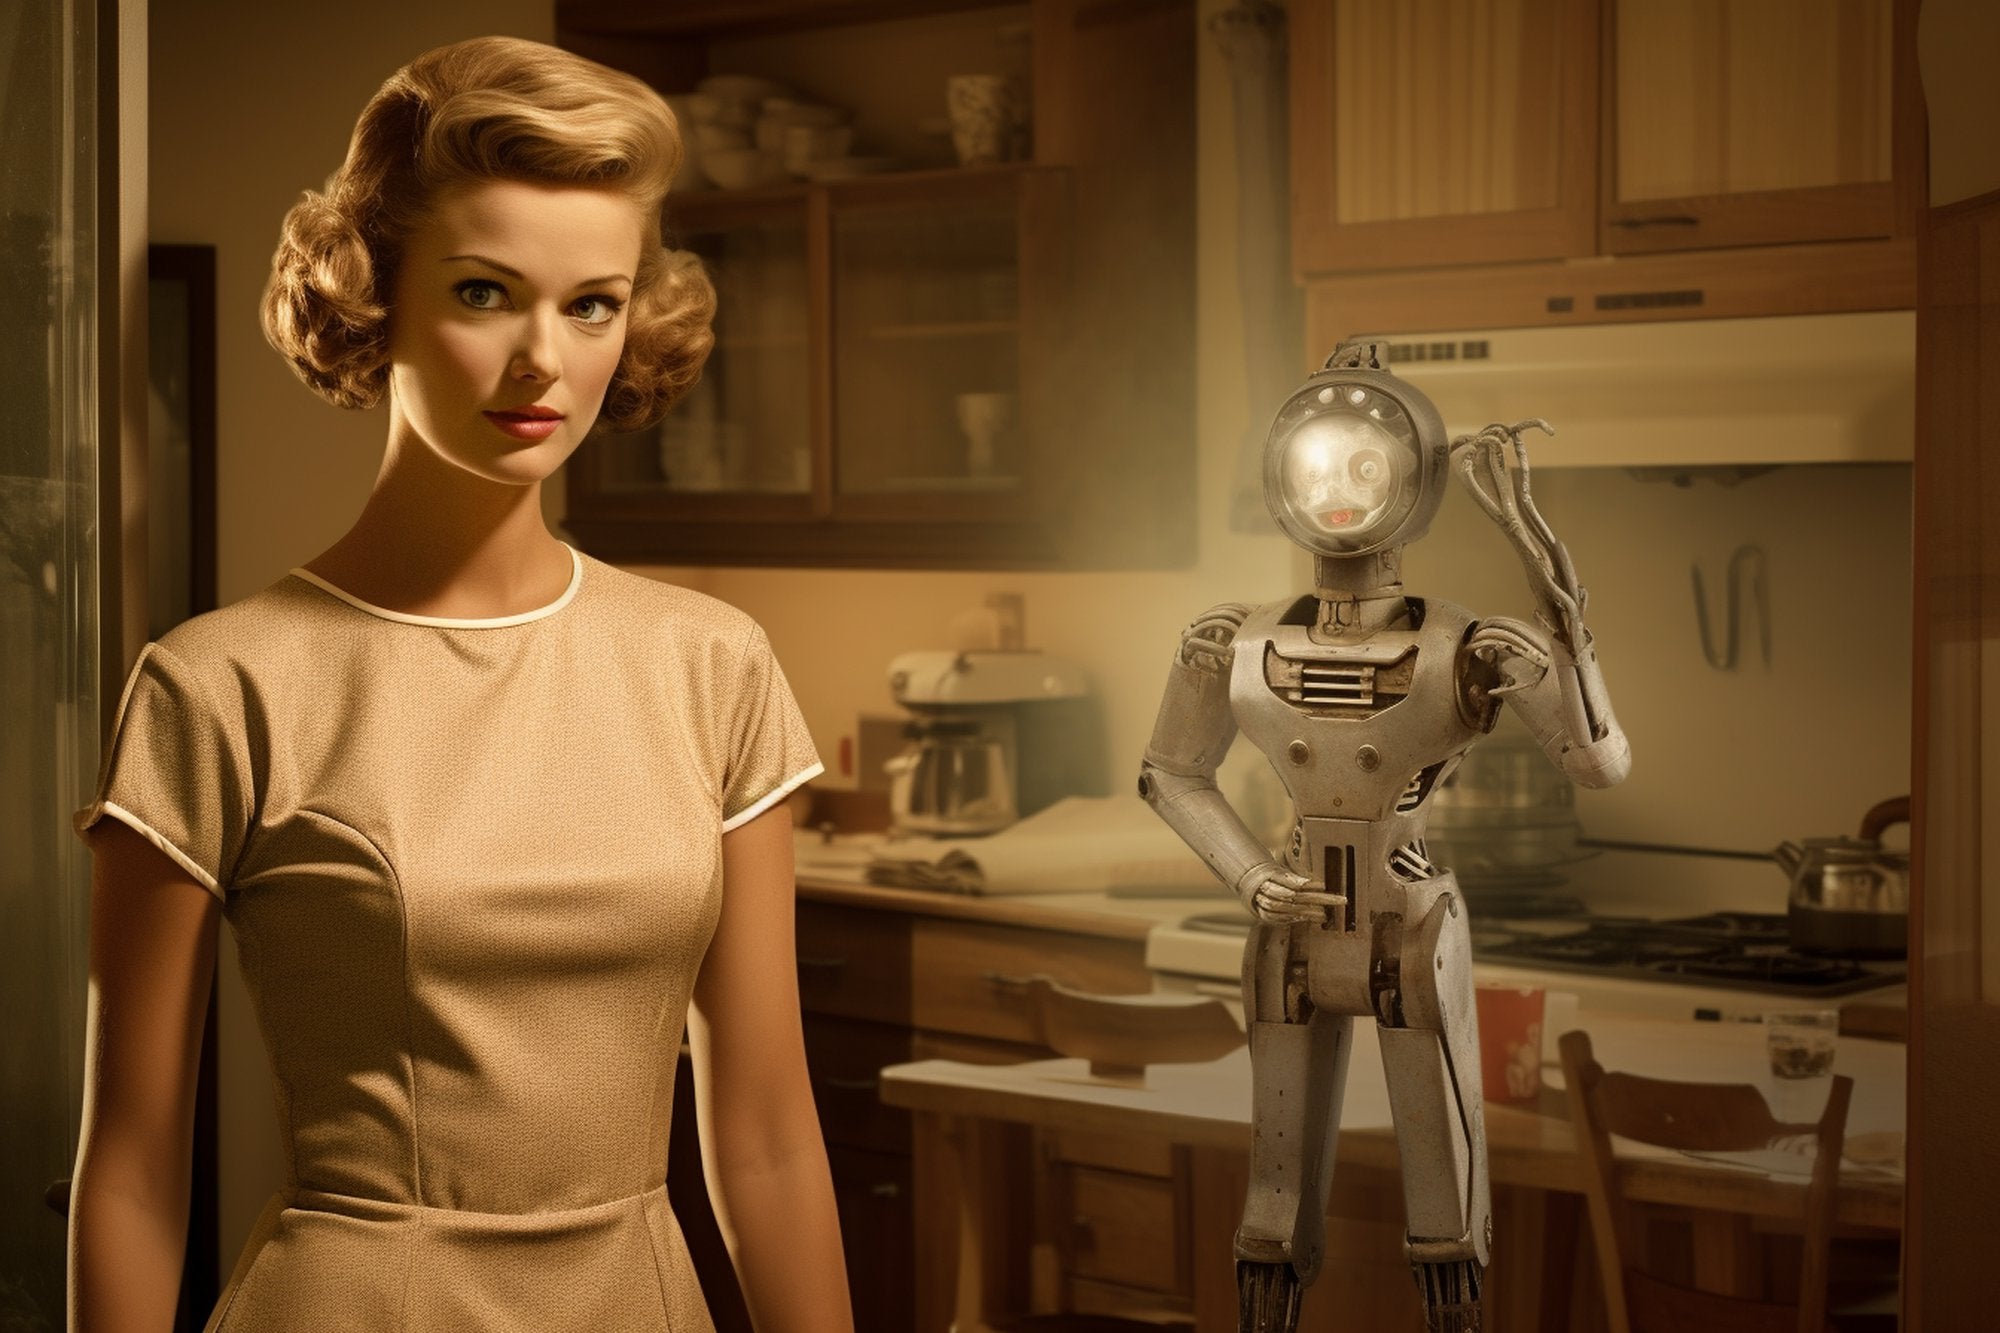 Portrait of a 1950s housewife transformed into a robotic figure, a fusion of AI Art and AI Generated Artwork by Midjourney